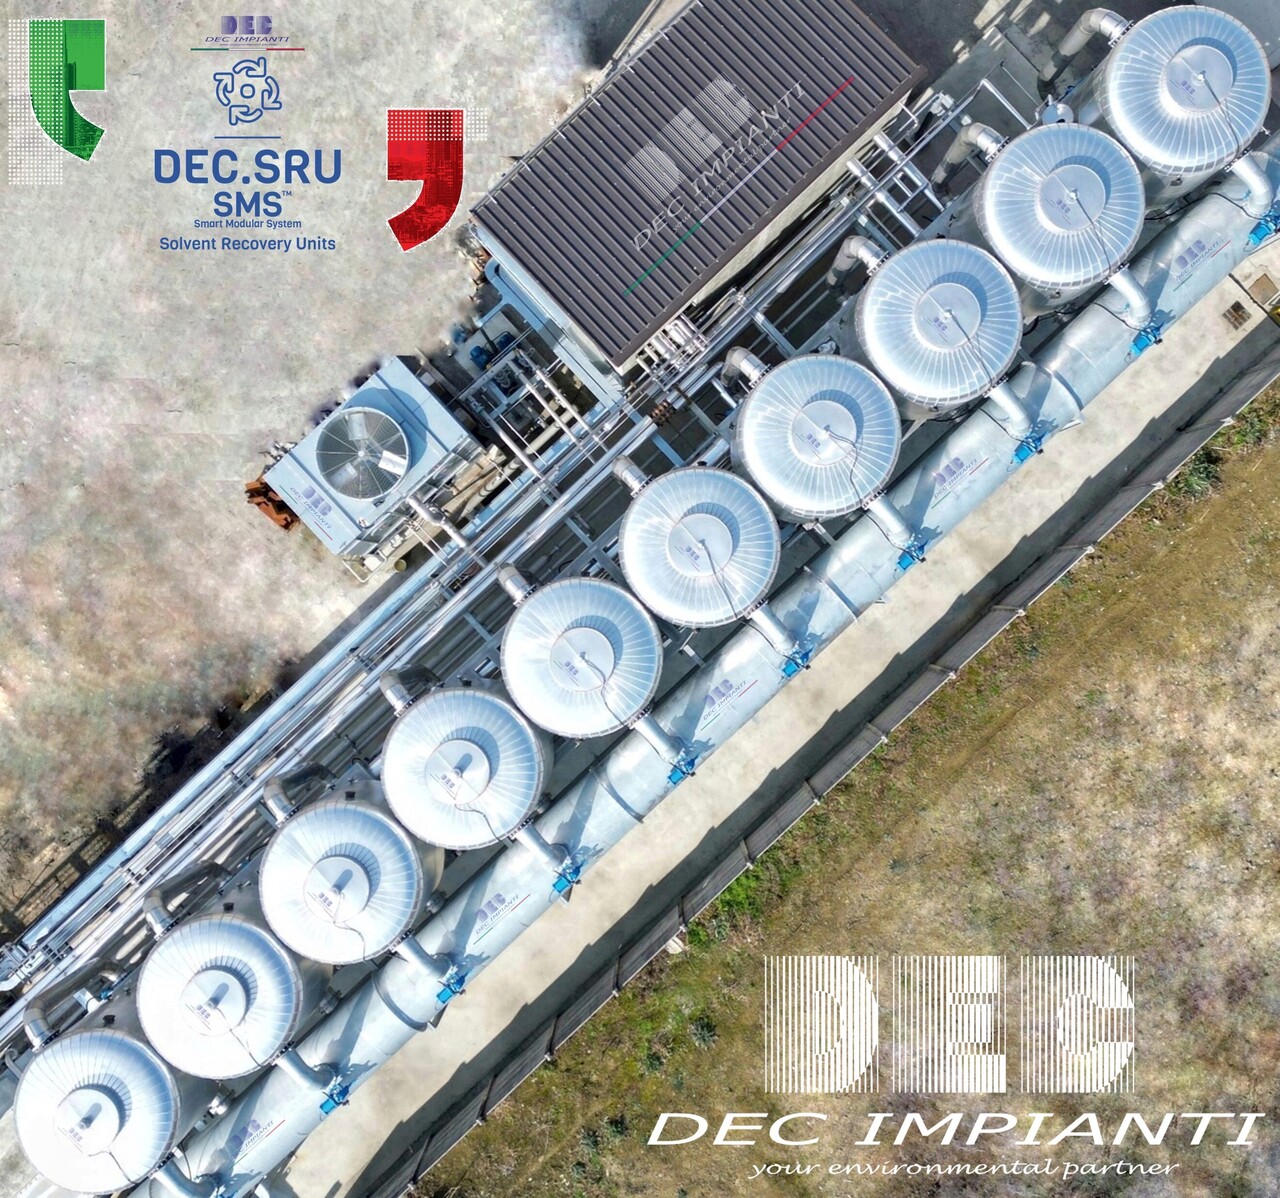 DEC IMPIANTI, DEC, solvent recovery for solvent based lamination, SRU, SRS, SRP, solvent based lamination, laminating, VOC emission control, solvent recovery, VOC recovery, VOC abatement, VOC emission control technology, VOC abatement systems, air pollution control, solvent recovery systems, environmental compliance, VOC recovery system, solvent recovery unit, VOC recovery equipment, solvent recovery equipment, solvent recycling, VOC capture, solvent reclamation, solvent purification, VOC treatment, solvent regeneration, distillation, solvent distillation, VOC recovery process, activated carbon, adsorbent, ethyl acetate, ETAC, MEK, nitrogen, N2, LEL monitoring, engineering, supply, turnkey, sustainable, innovation, decarbonization, energy efficiency, chemical recycling, recycling, sustainability solutions, sustainability, reclaiming, carbon offset, circular economy, climate change, climate policy, climate action, environmental challenges, sustainable development, sustainability roadmap, Cerutti, Rotomec, Bobst, Nordmeccanica, Flexotecnica, Windmoeller Hoelscher, Uteco, Kohli, Comexi, Acom, SAM, Beiren, Huitong, Pelikan